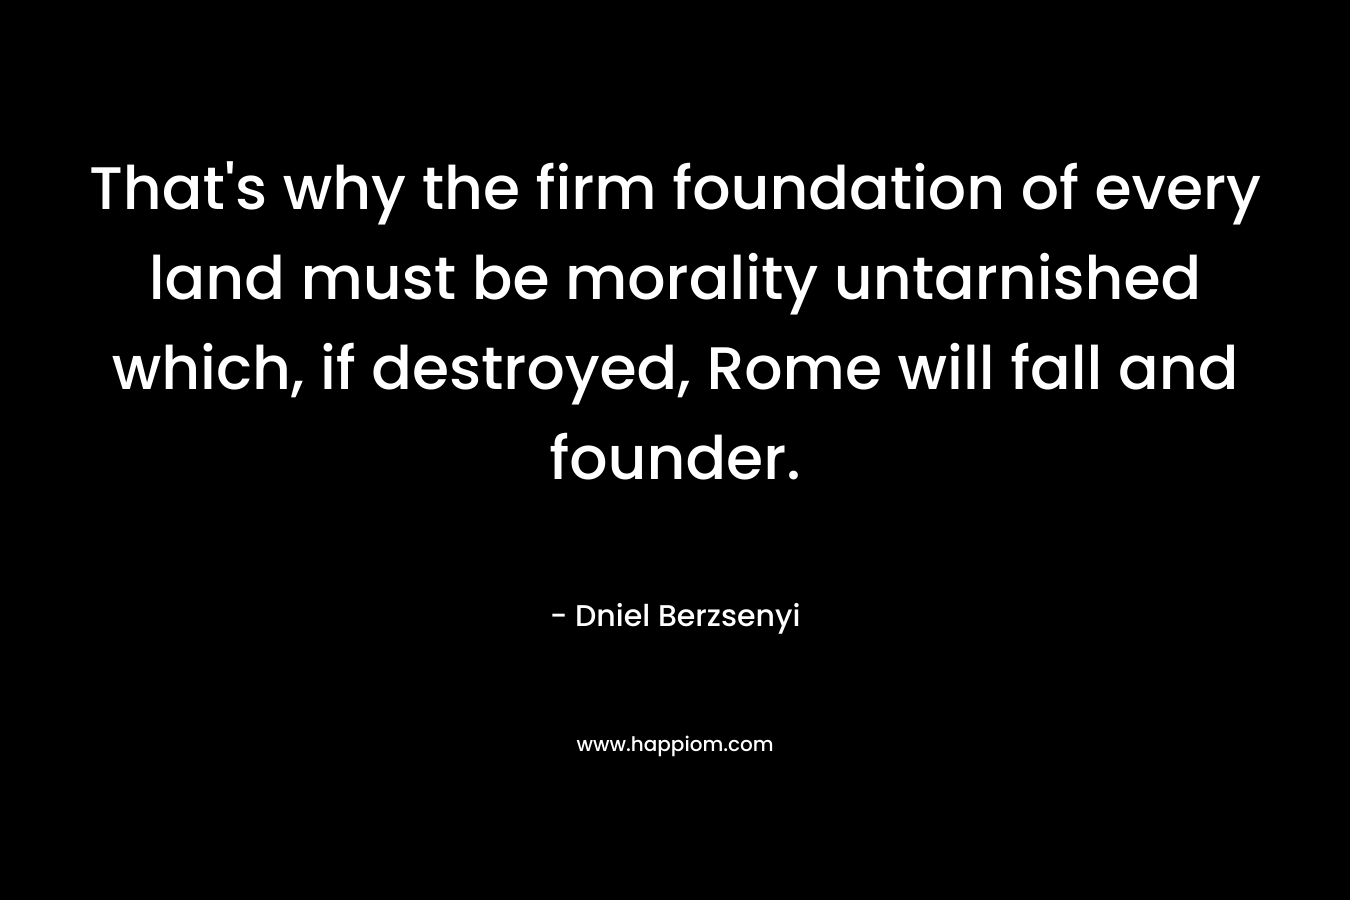 That’s why the firm foundation of every land must be morality untarnished which, if destroyed, Rome will fall and founder. – Dniel Berzsenyi